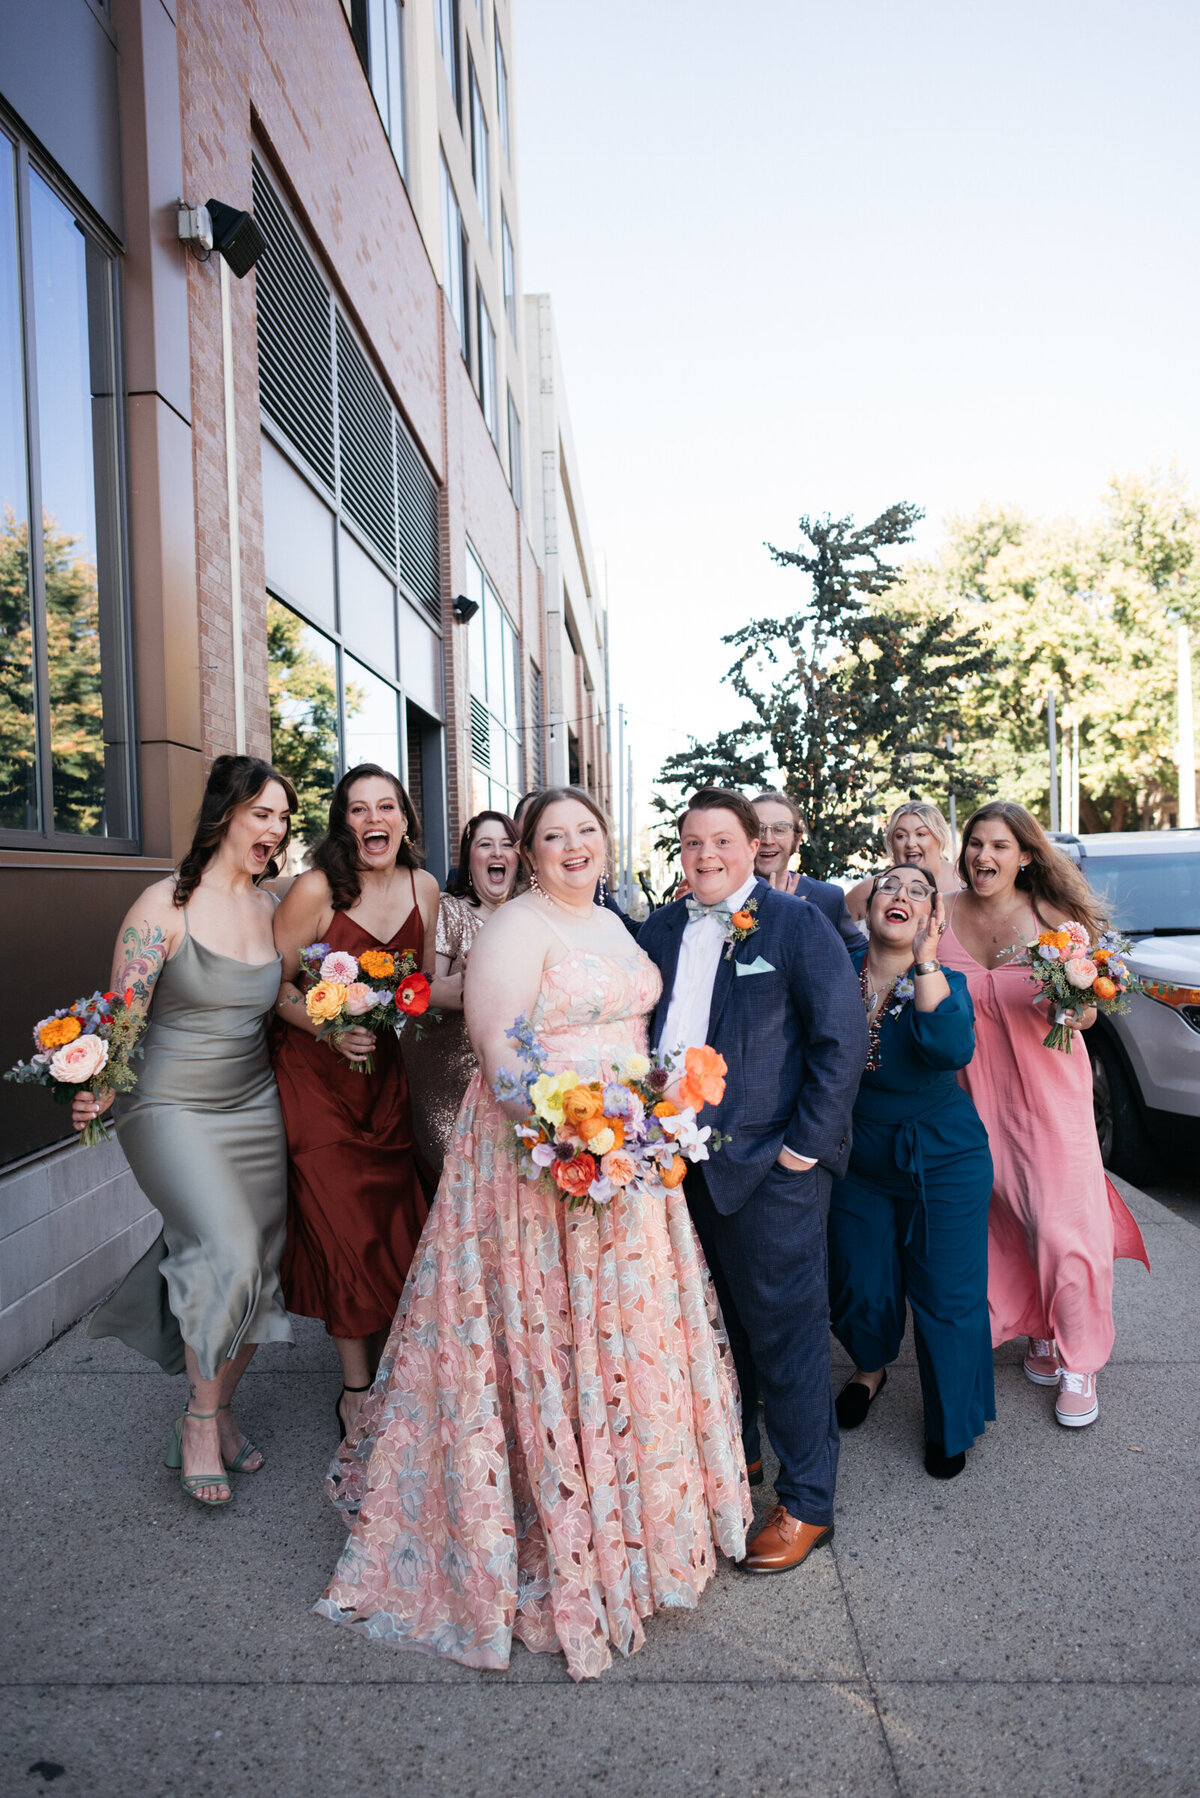 bridesmaids in mismatching bridesmaid dresses and bride wearing colorful wedding dress